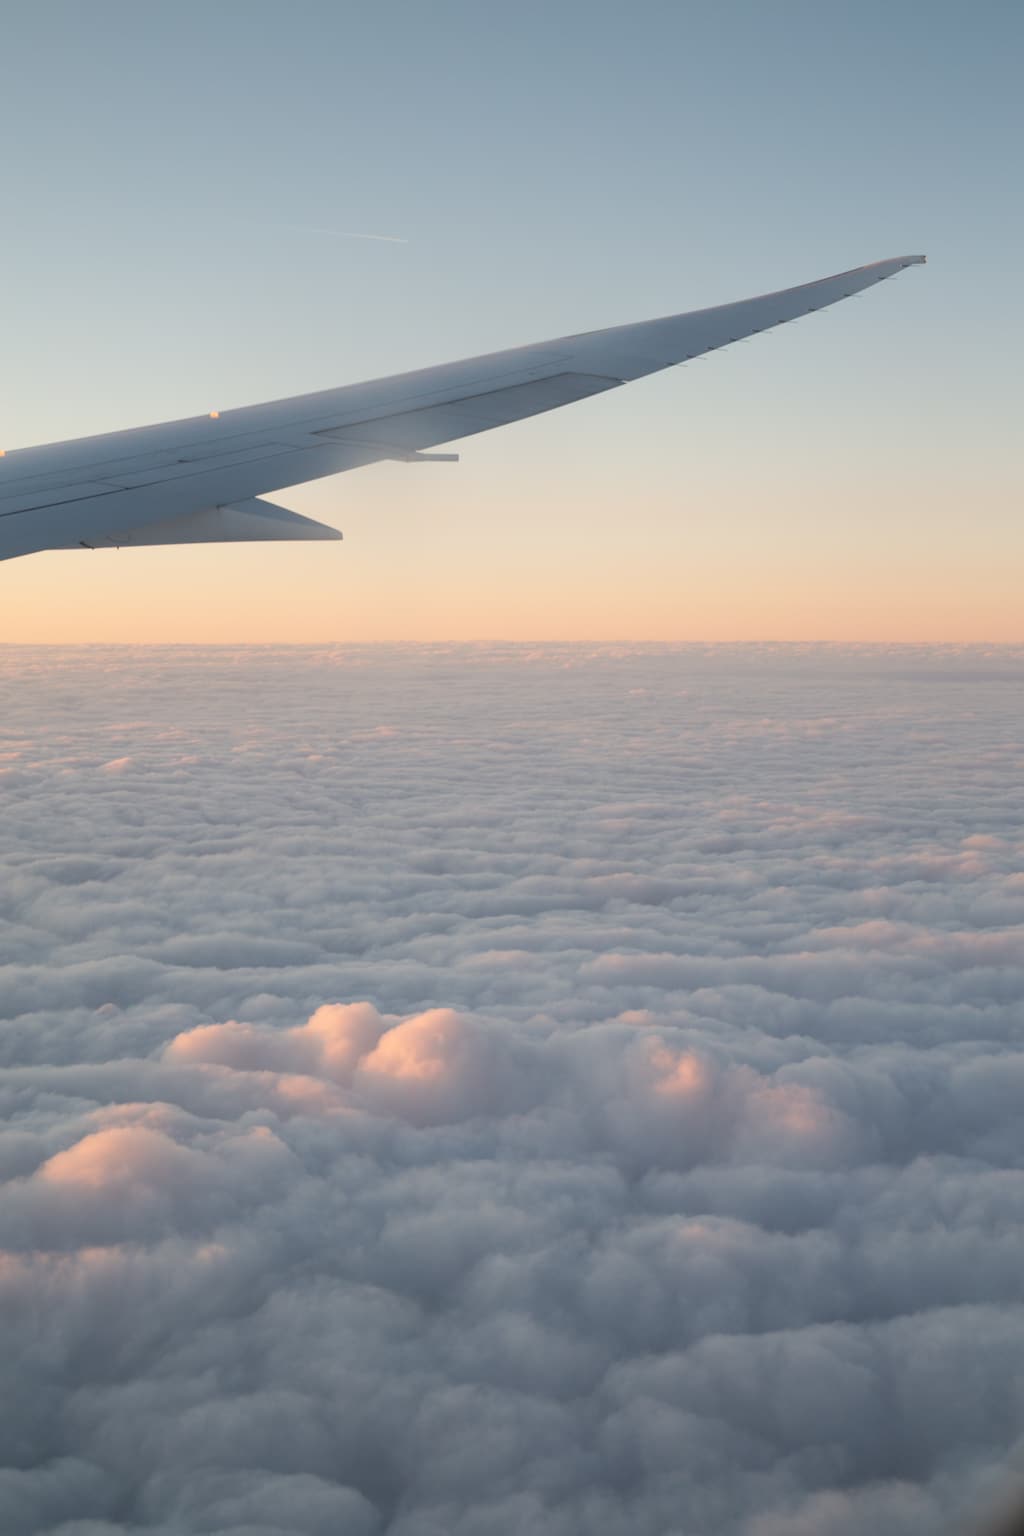 Au pair arrival. The sun rise is visible above the clouds from the window of an airplane.